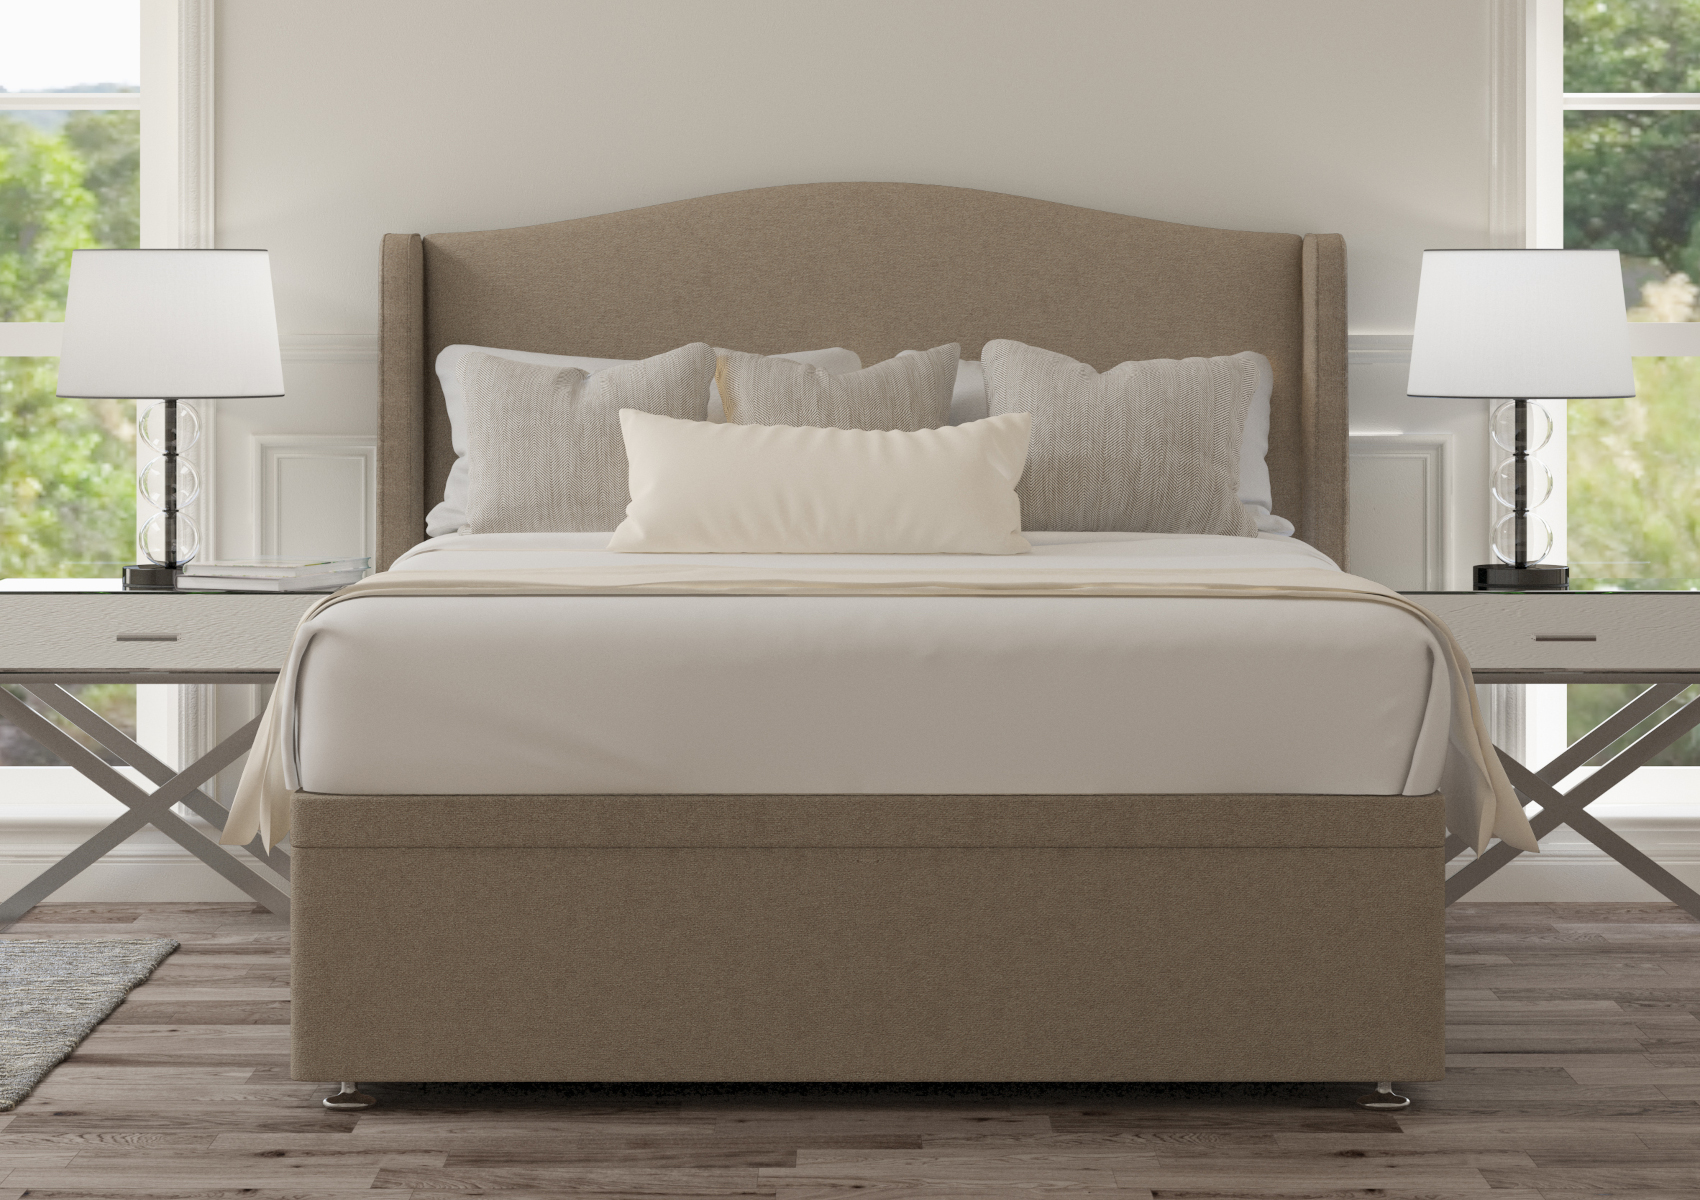 View Mabel Arran Natural Upholstered King Size Ottoman Bed Time4Sleep information